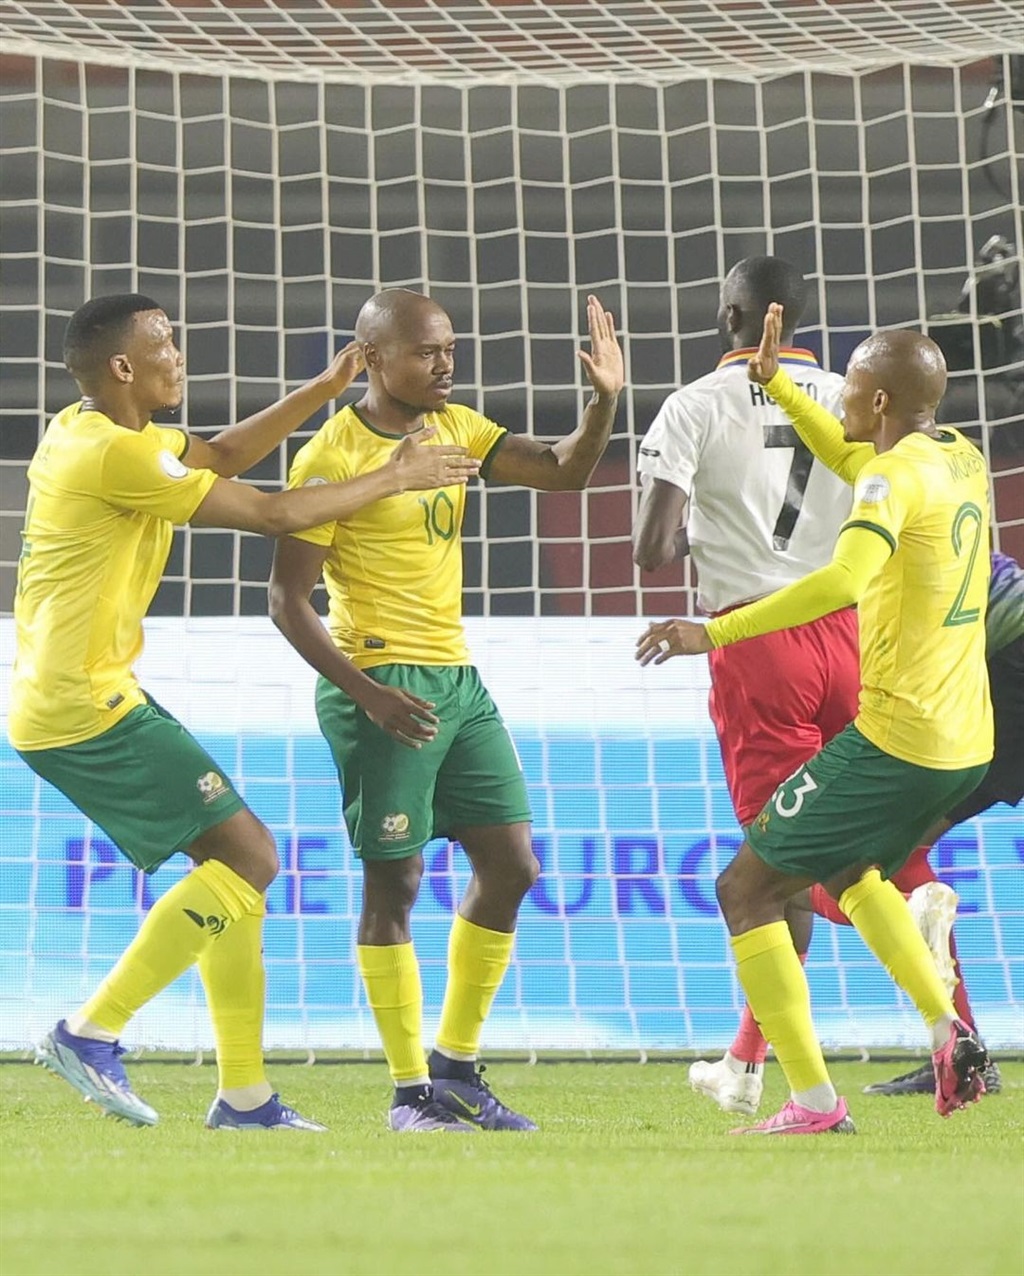 The spirit in the Bafana camp is quite high with iGwijo playing a major role in the team's morale.